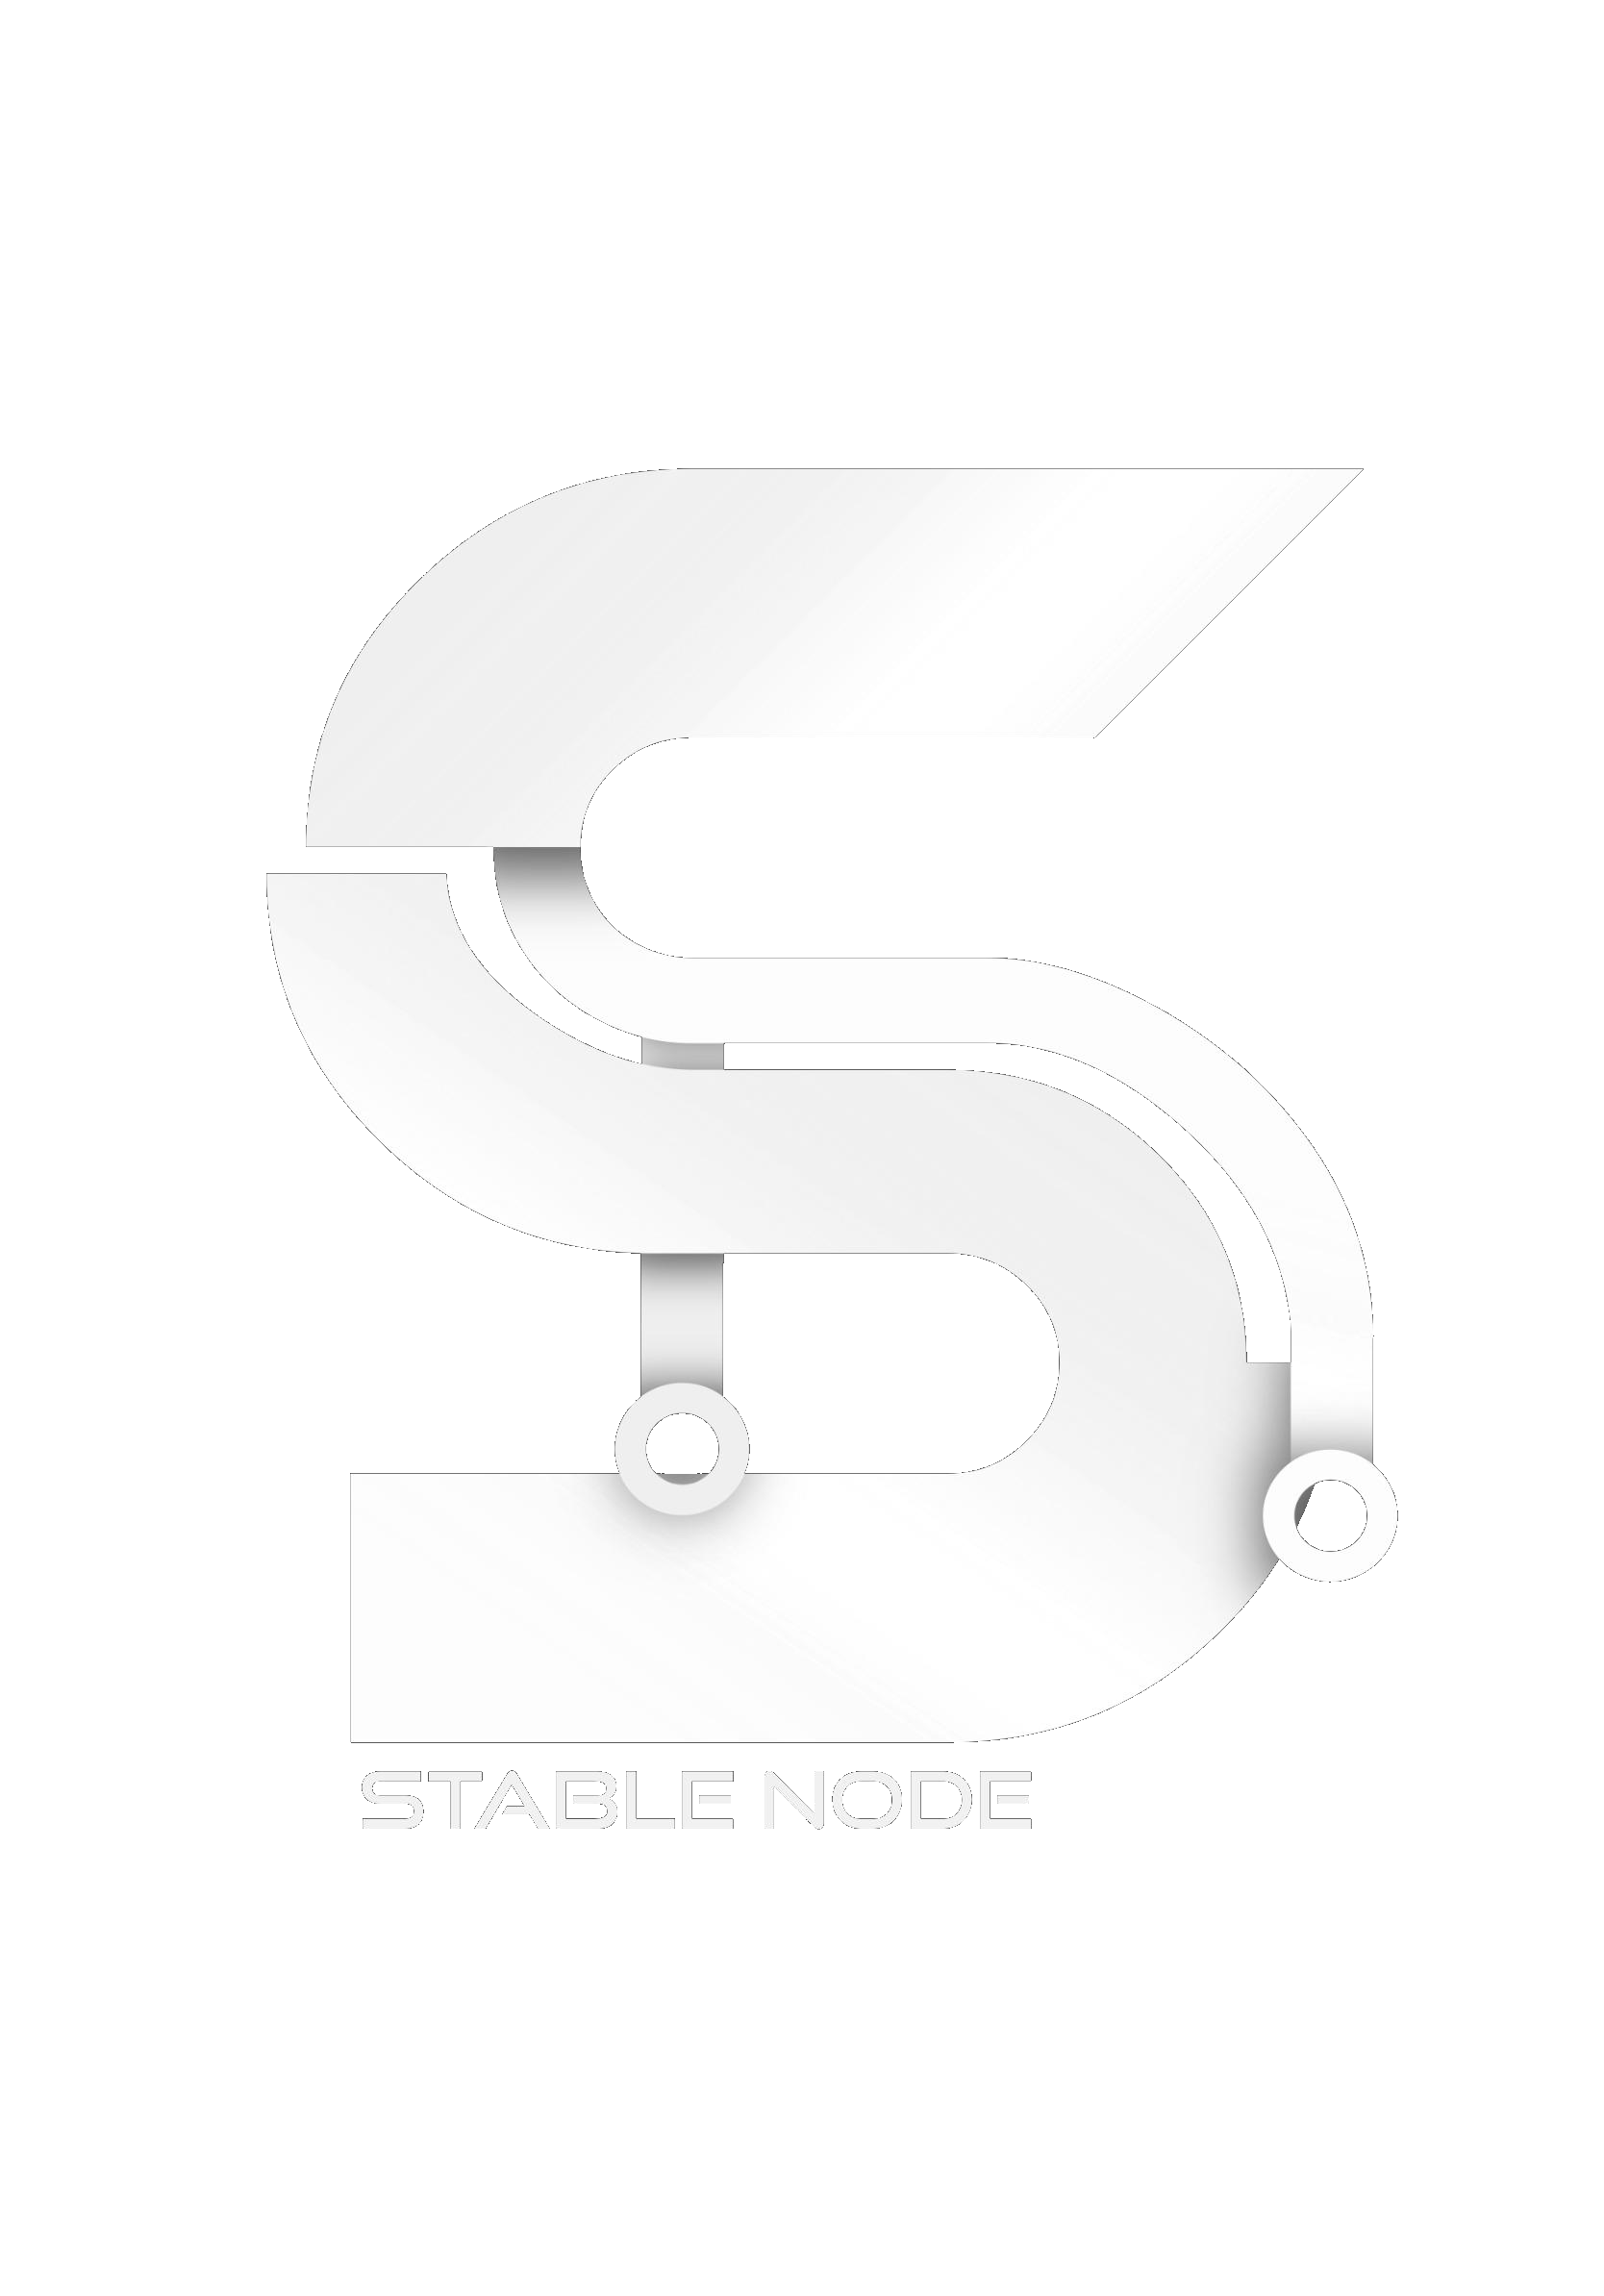 Stable Node